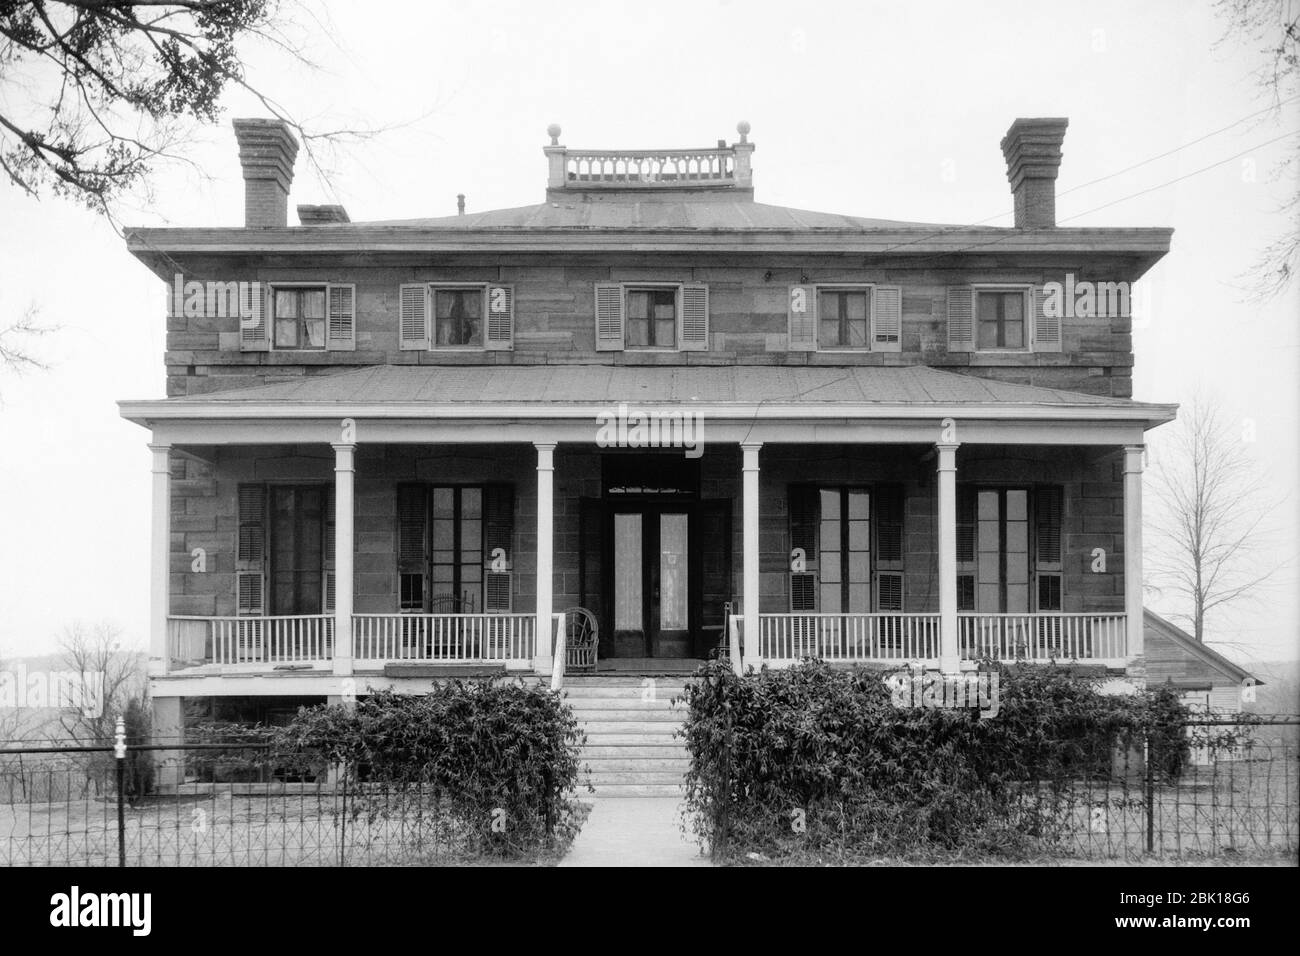 Commanding Officer's Quarters, built in 1868–1870, at historic Fort Gibson in Fort Gibson, Oklahoma. The residence of the commanding officer and his family was a center of formal functions of celebration, greeting and lodging for significant visiting dignitaries. Stock Photo